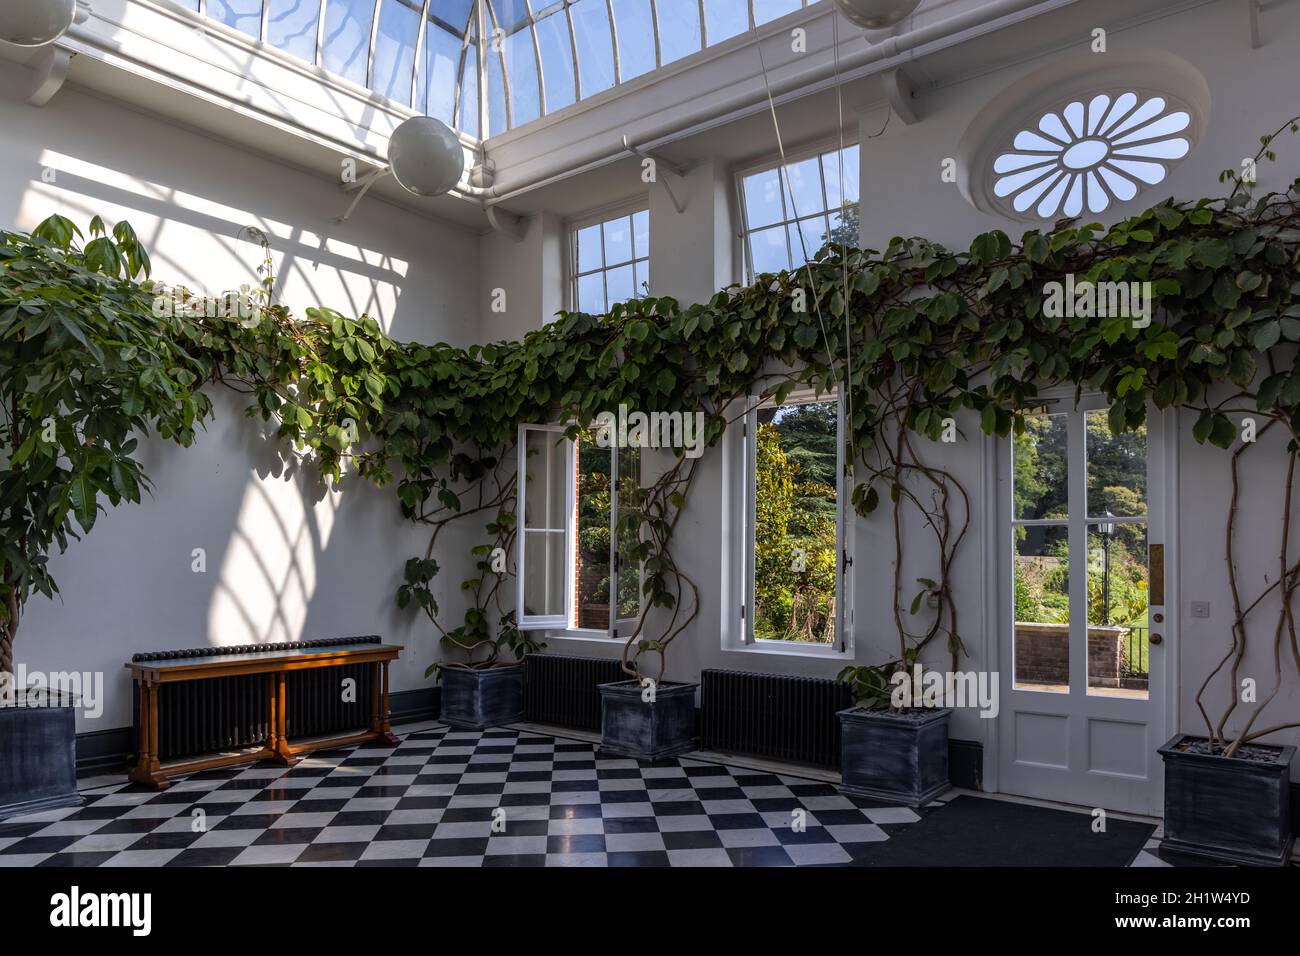 The Winter Garden in York House Twickenham, England, which currently serves as the Town Hall of the London Borough of Richmond upon Thames. Stock Photo